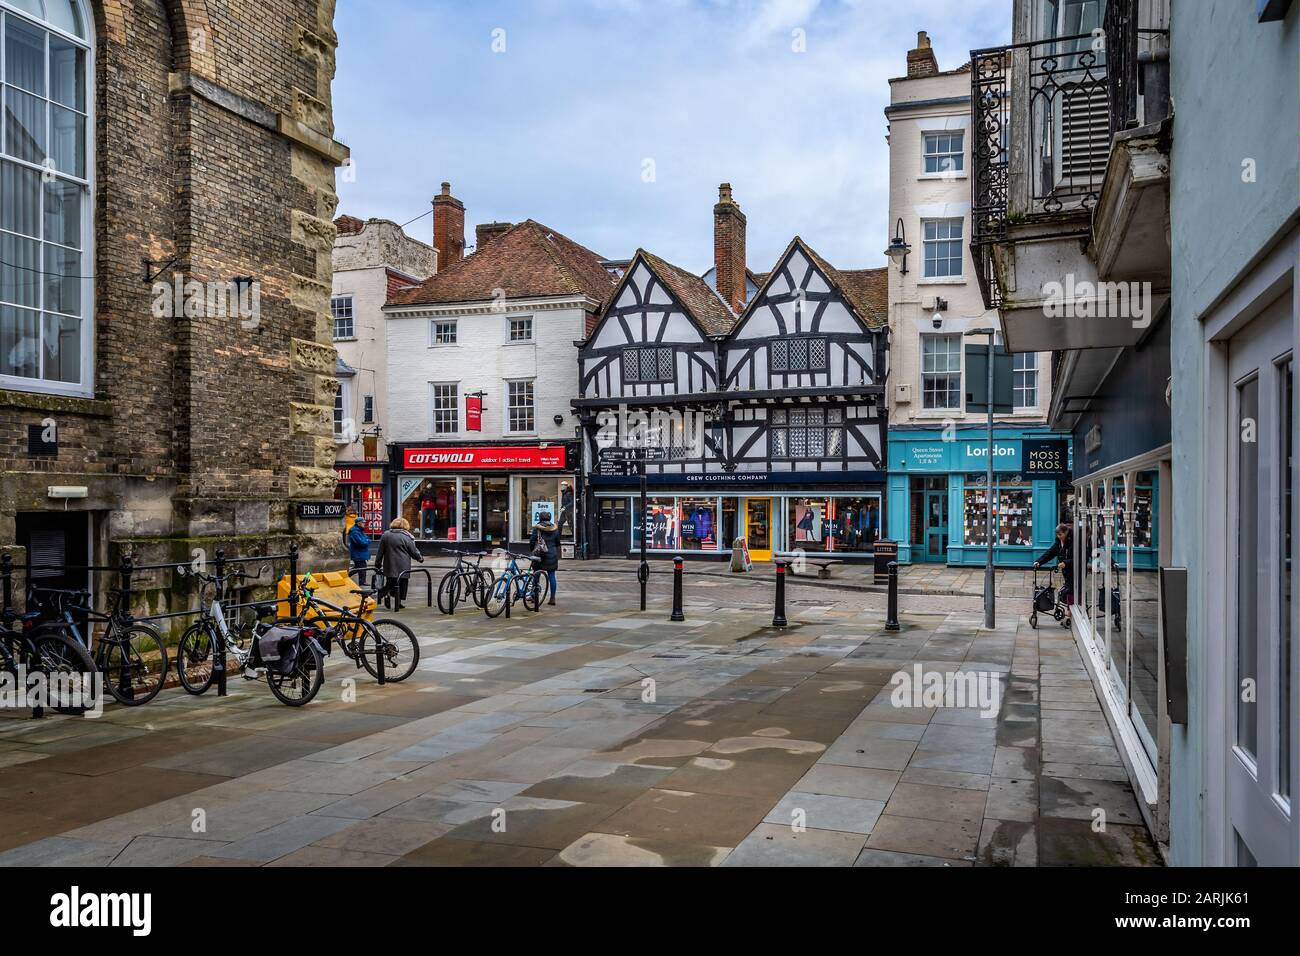 View of medieval half timbered house, now Crew Clothing Shop, from Fish Row, Salisbury, Wiltshire, UK on 28 January 2020 Stock Photo